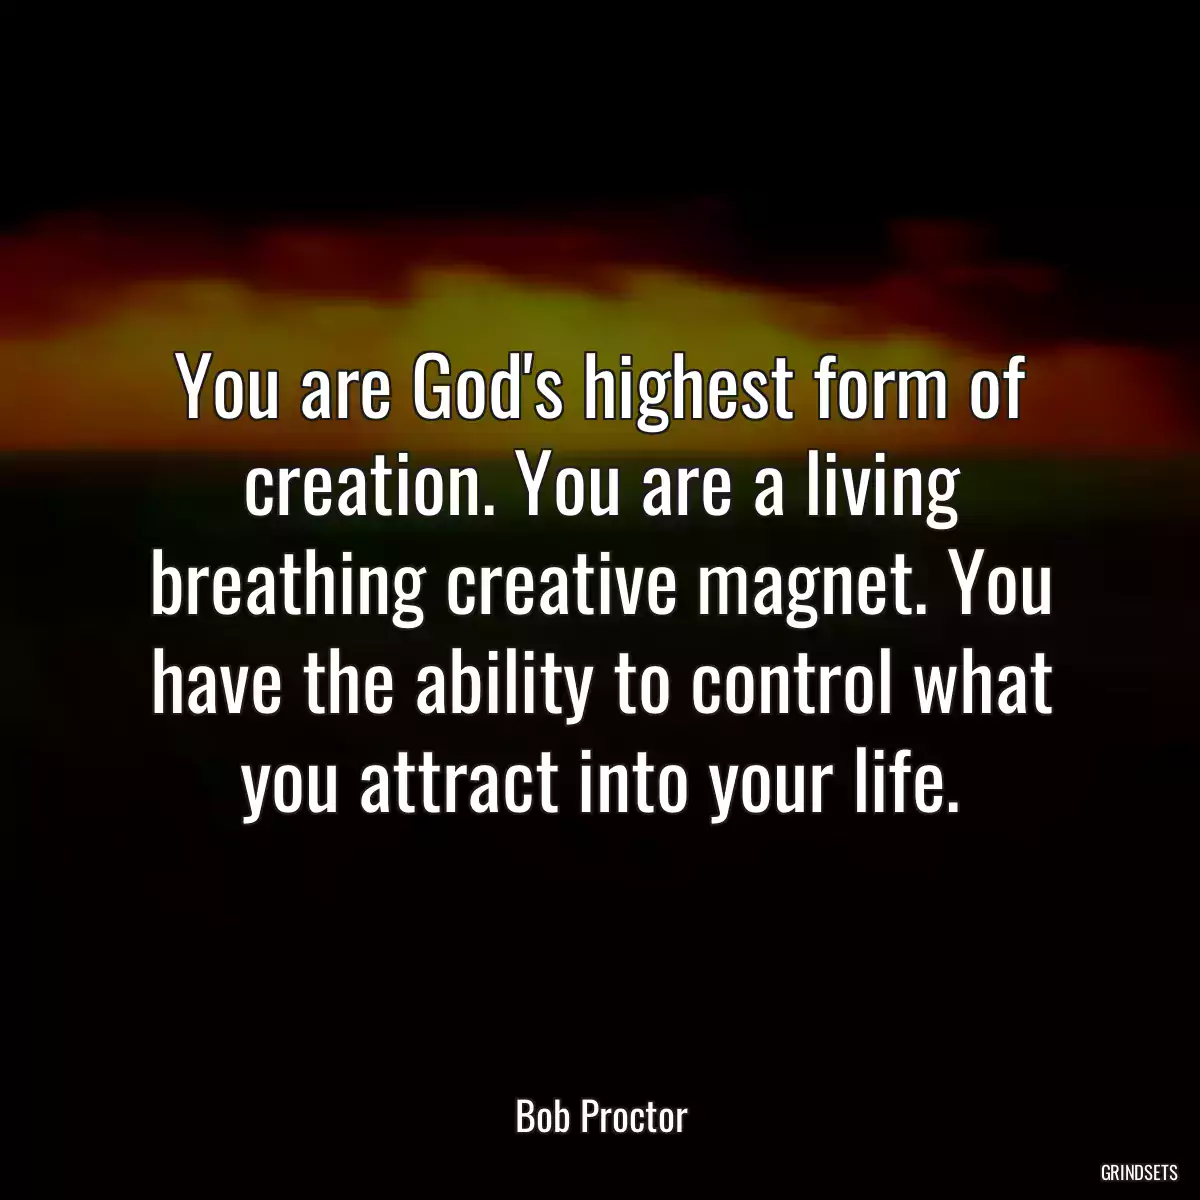 You are God\'s highest form of creation. You are a living breathing creative magnet. You have the ability to control what you attract into your life.